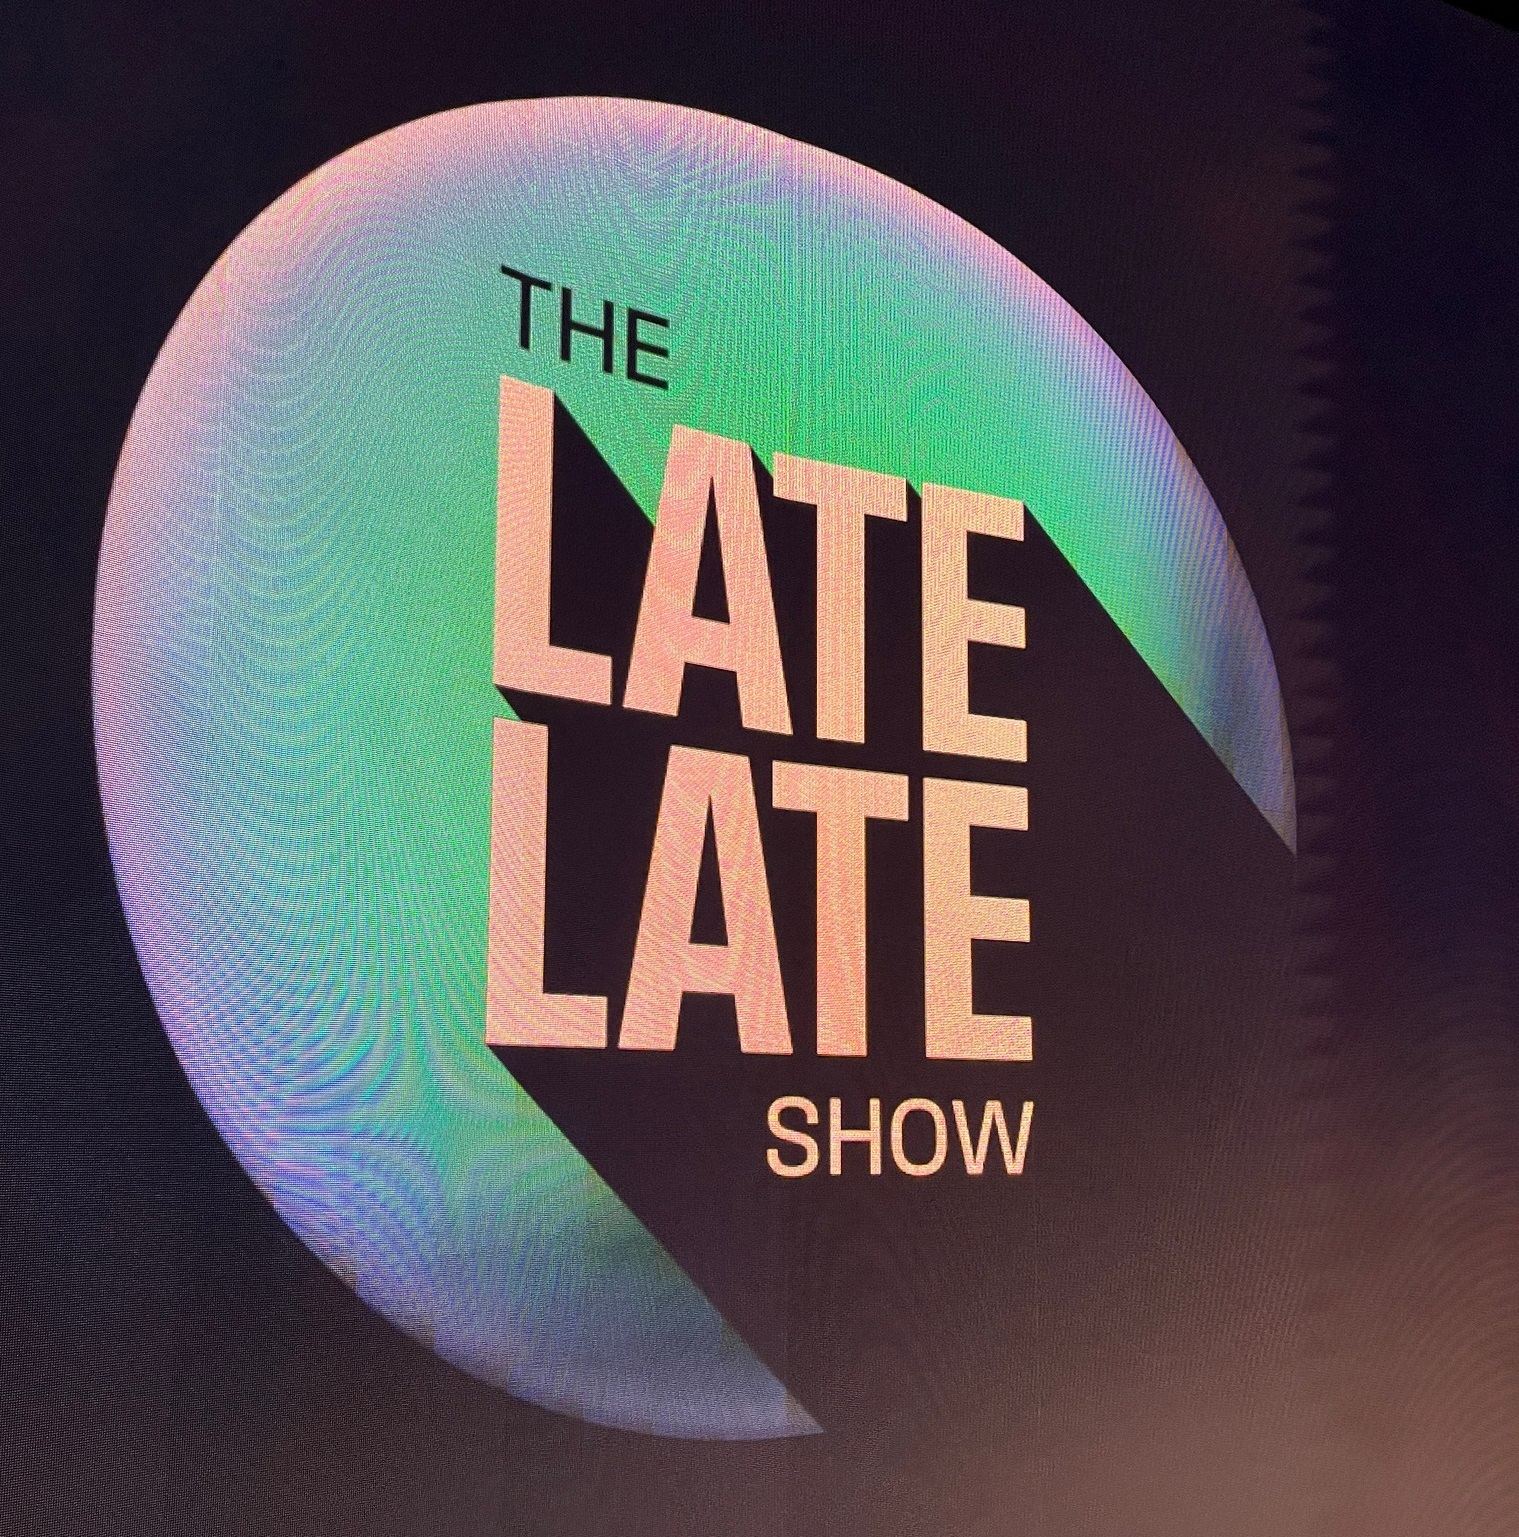 The new logo for The Late Late Show